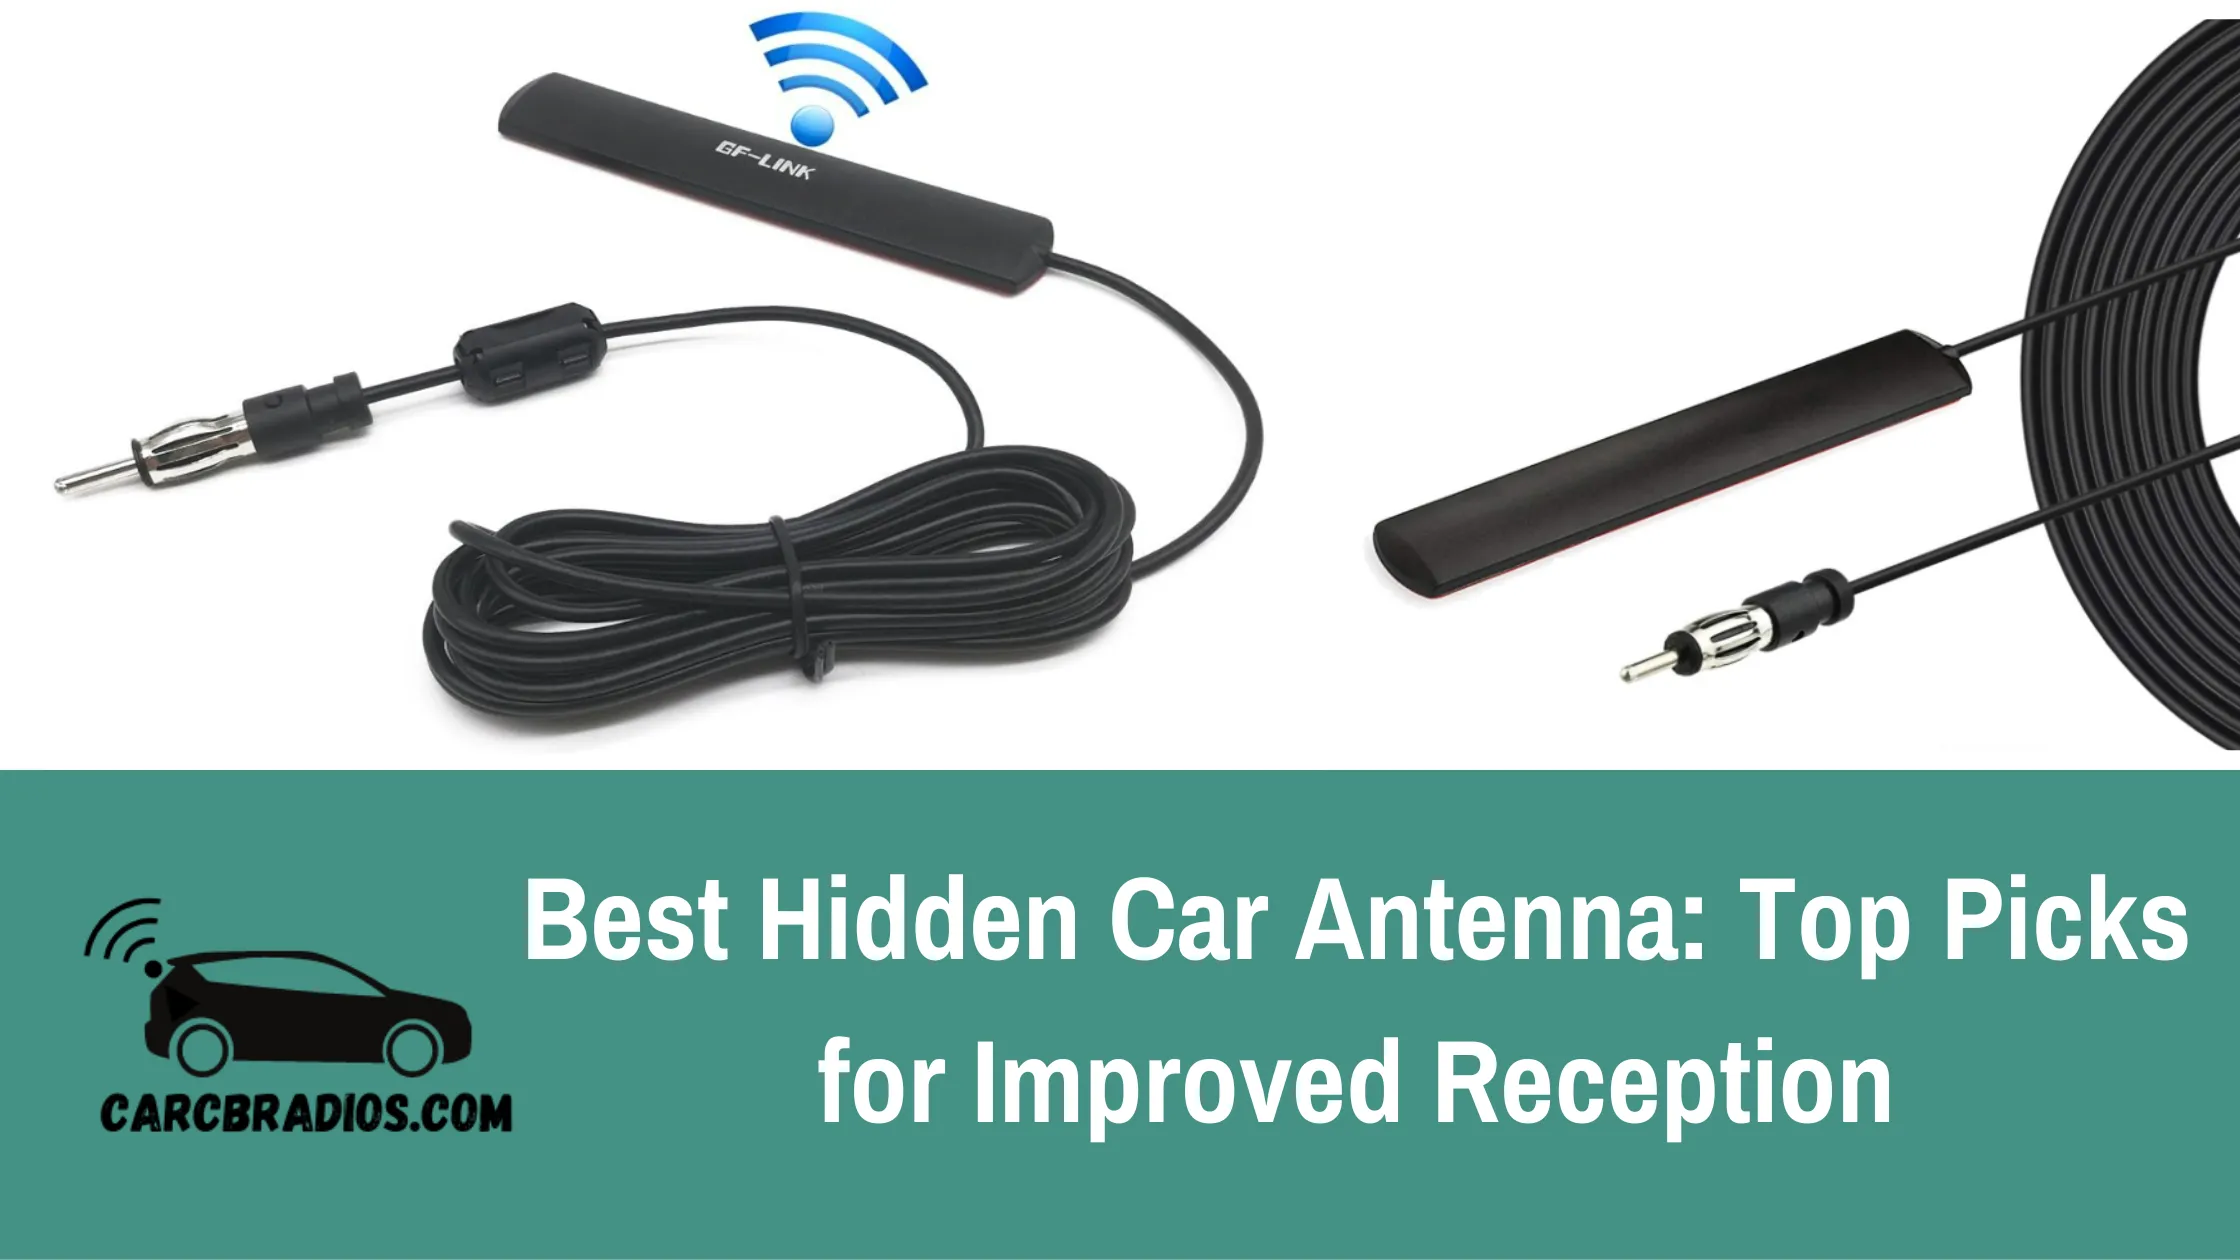 When looking for the best hidden car antenna, there are a few critical things to consider. The first is the type of antenna, as there are both internal and external hidden antennas. Internal antennas are installed within the car and require no external mounting, while external antennas are mounted underneath the car or behind the rearview mirror. The second consideration is the frequency range, as different antennas may specialize in different frequencies such as FM or GPS.